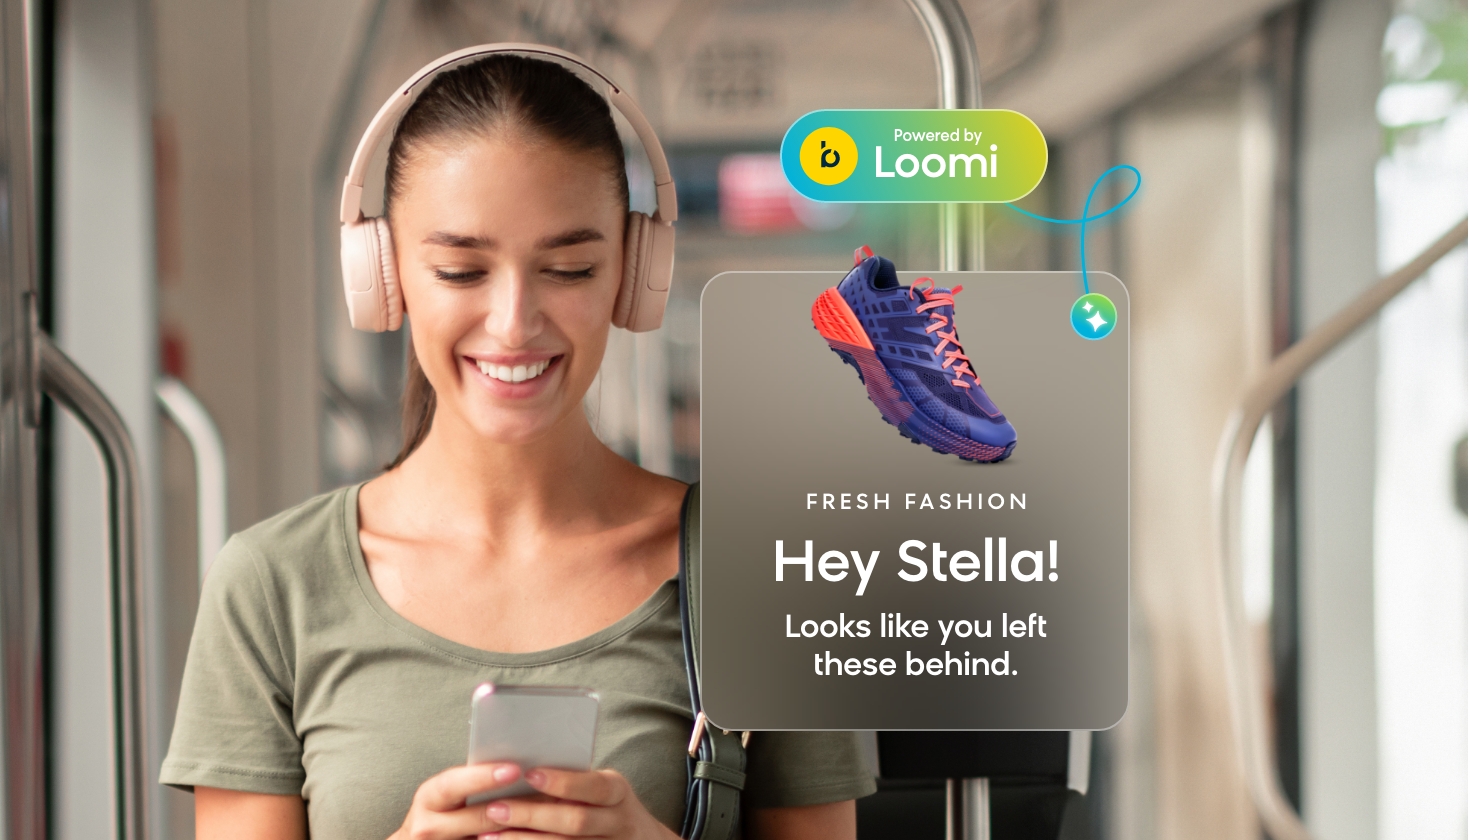 Bloomreach's AI, Loomi, sending personalized recommendations